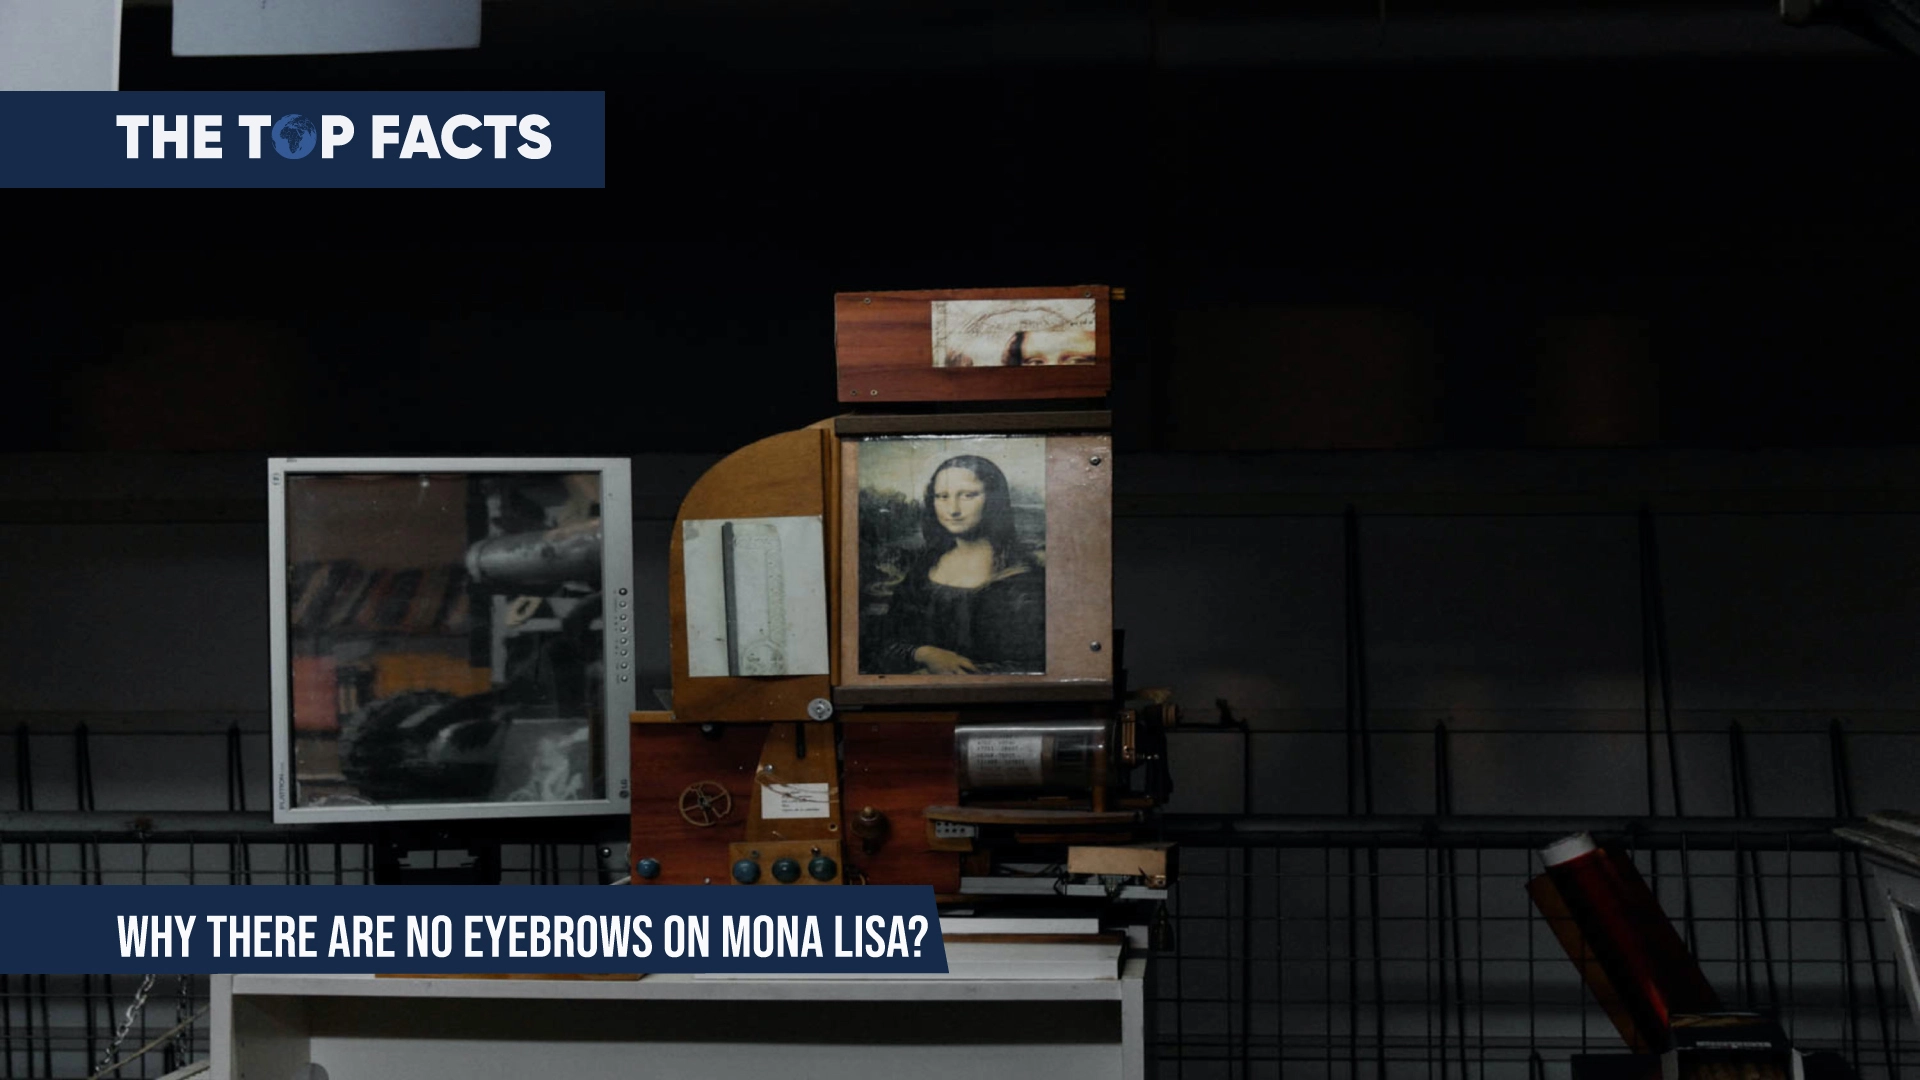 Unknown Facts: Why There are no eyebrows on Mona Lisa?